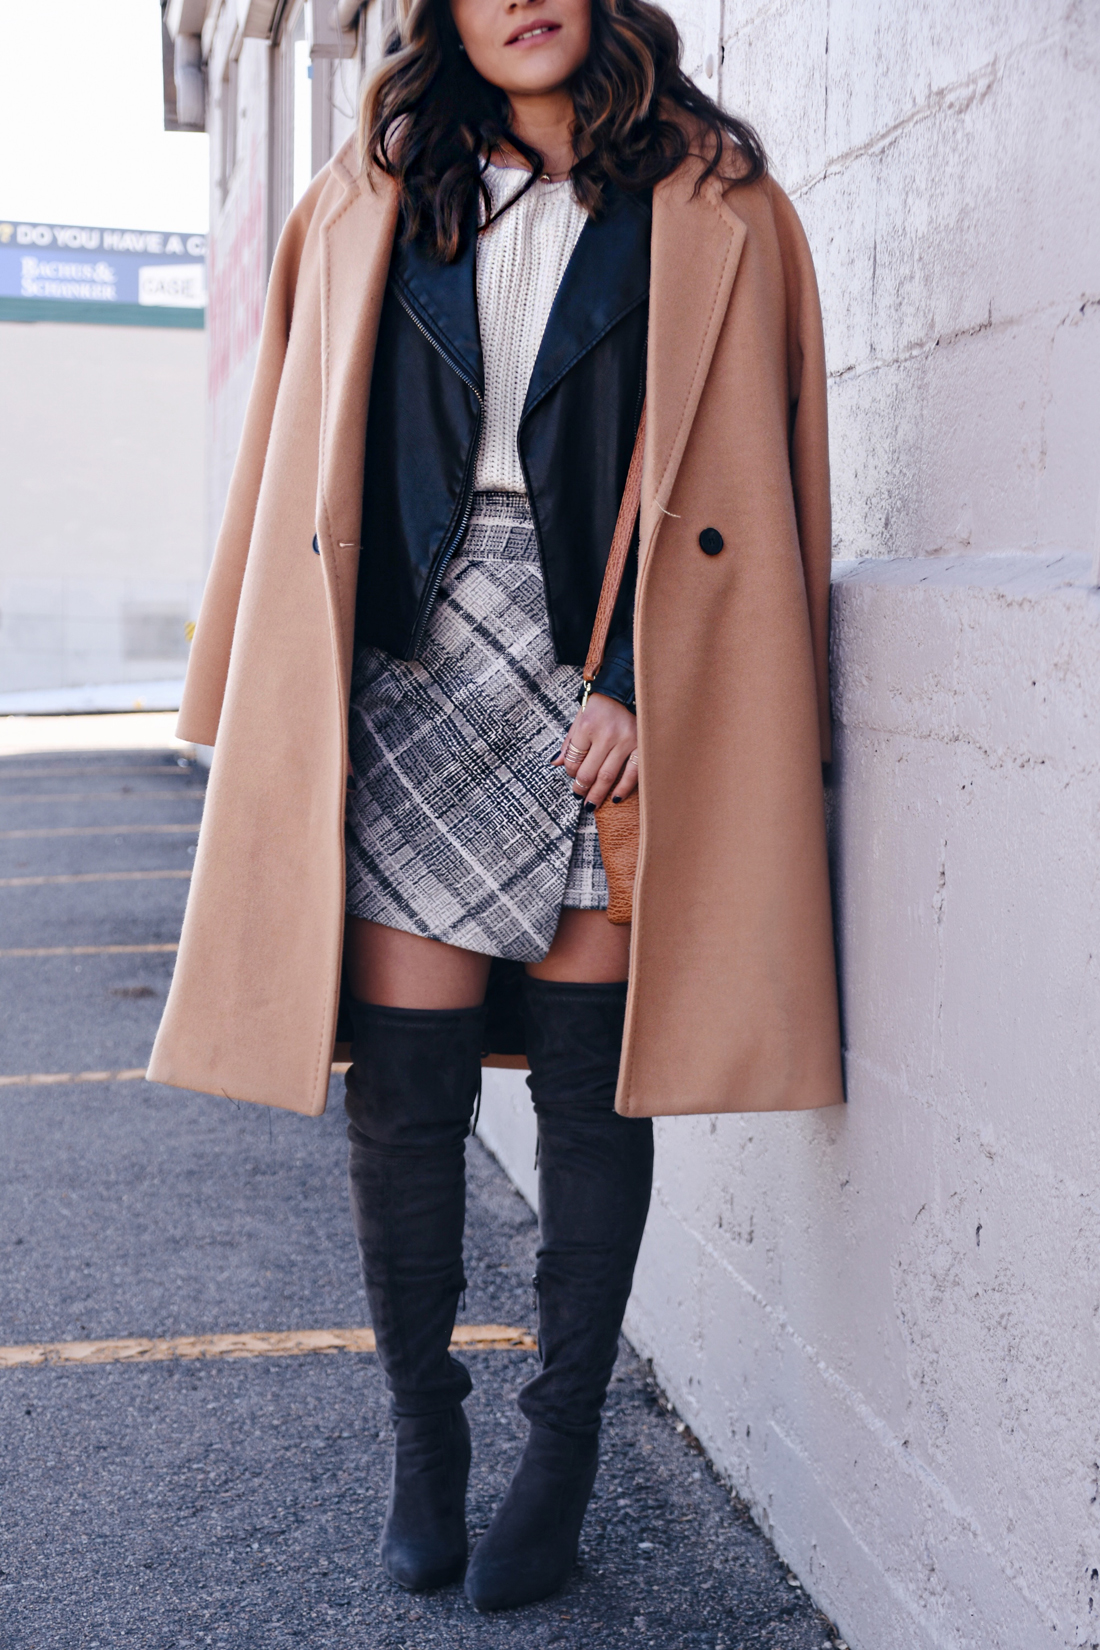 Carolina Hellal of Chic Talk wearing a Chicwish camel coat, plaid skirt, Topshop faux leather jacket, and Public Desire over the knee boots